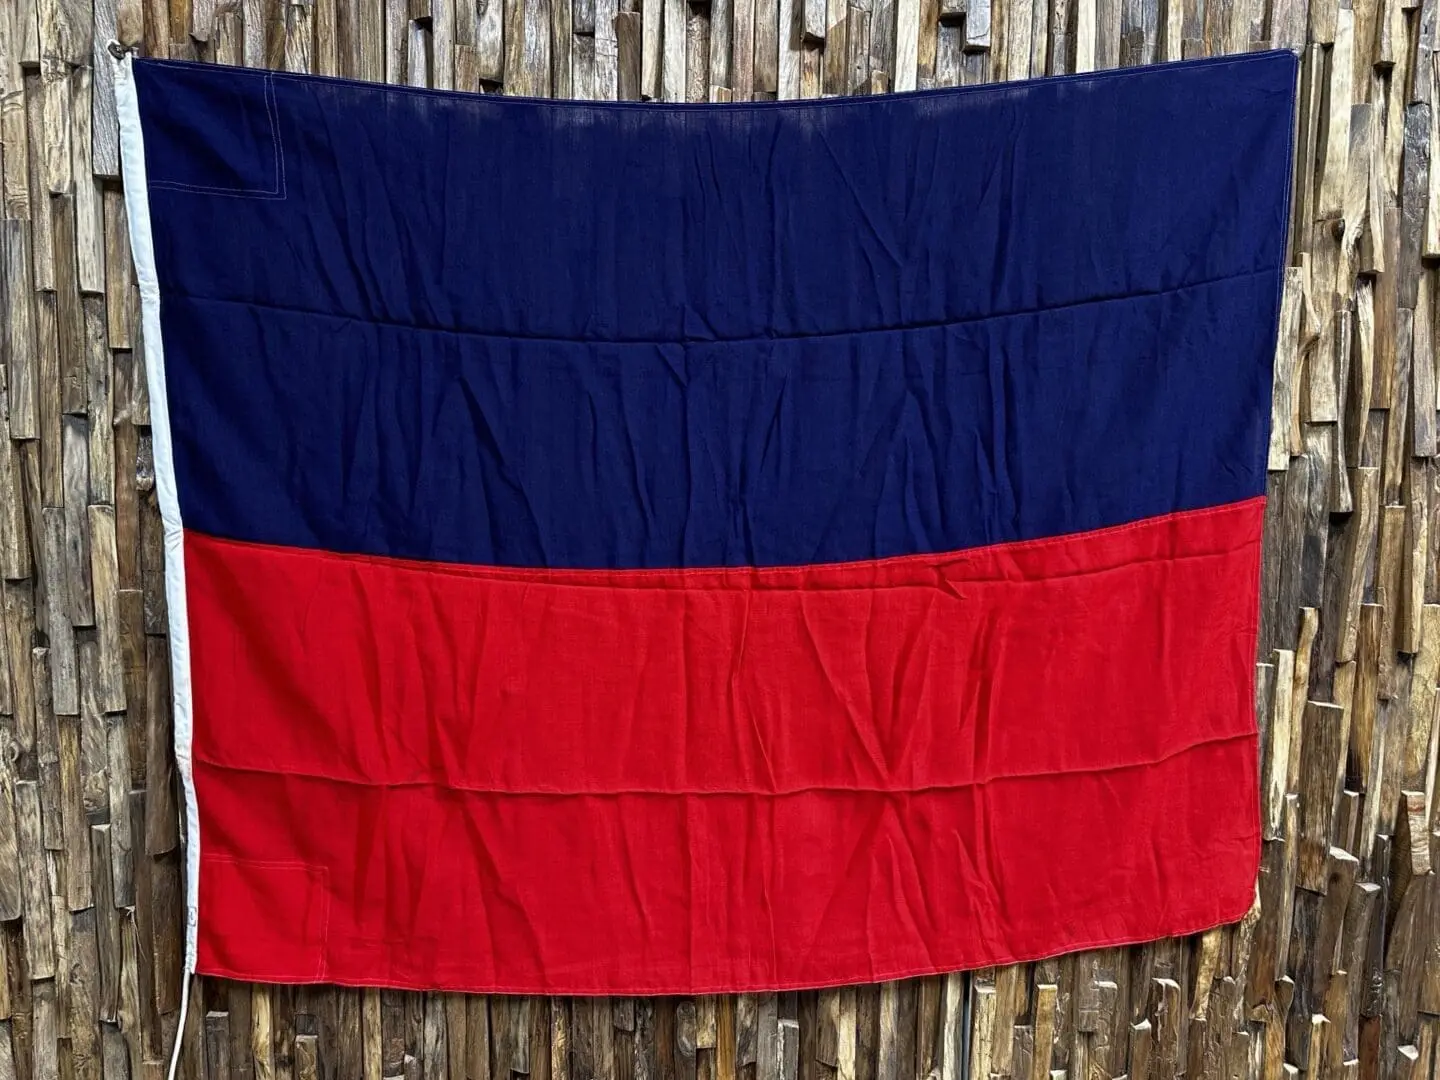 A red and blue flag hanging on the side of a wooden fence.